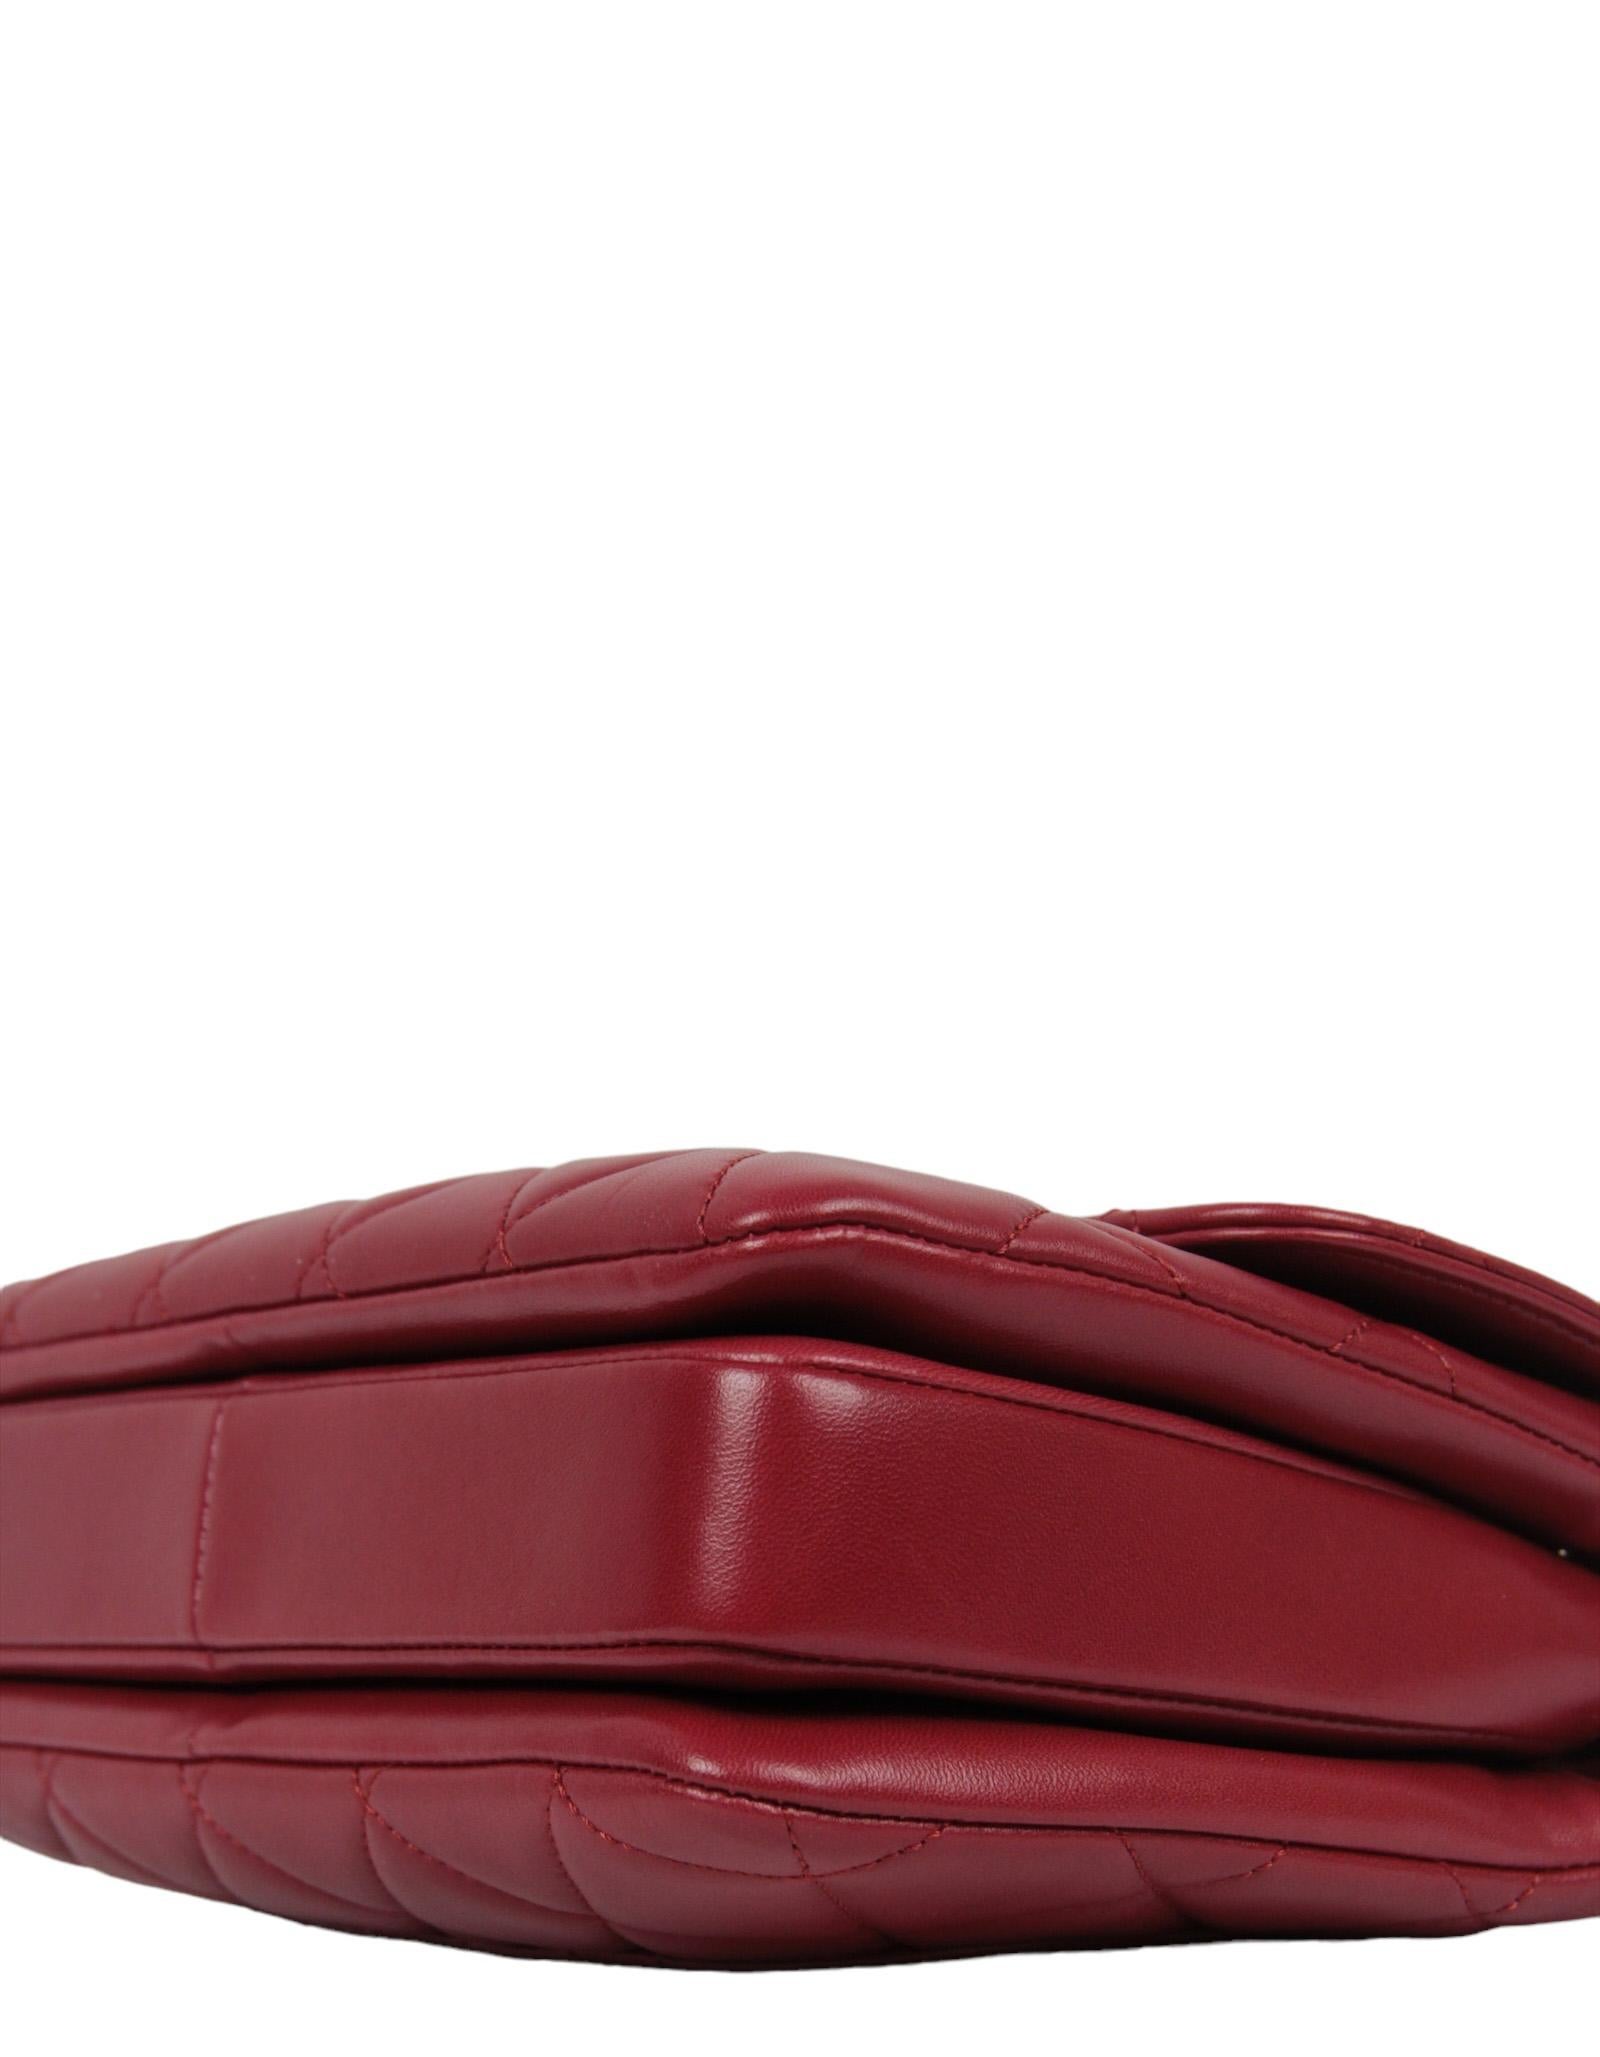 Chanel Burgundy Lambskin Quilted Trendy CC Dual Handle Flap Bag For Sale 2